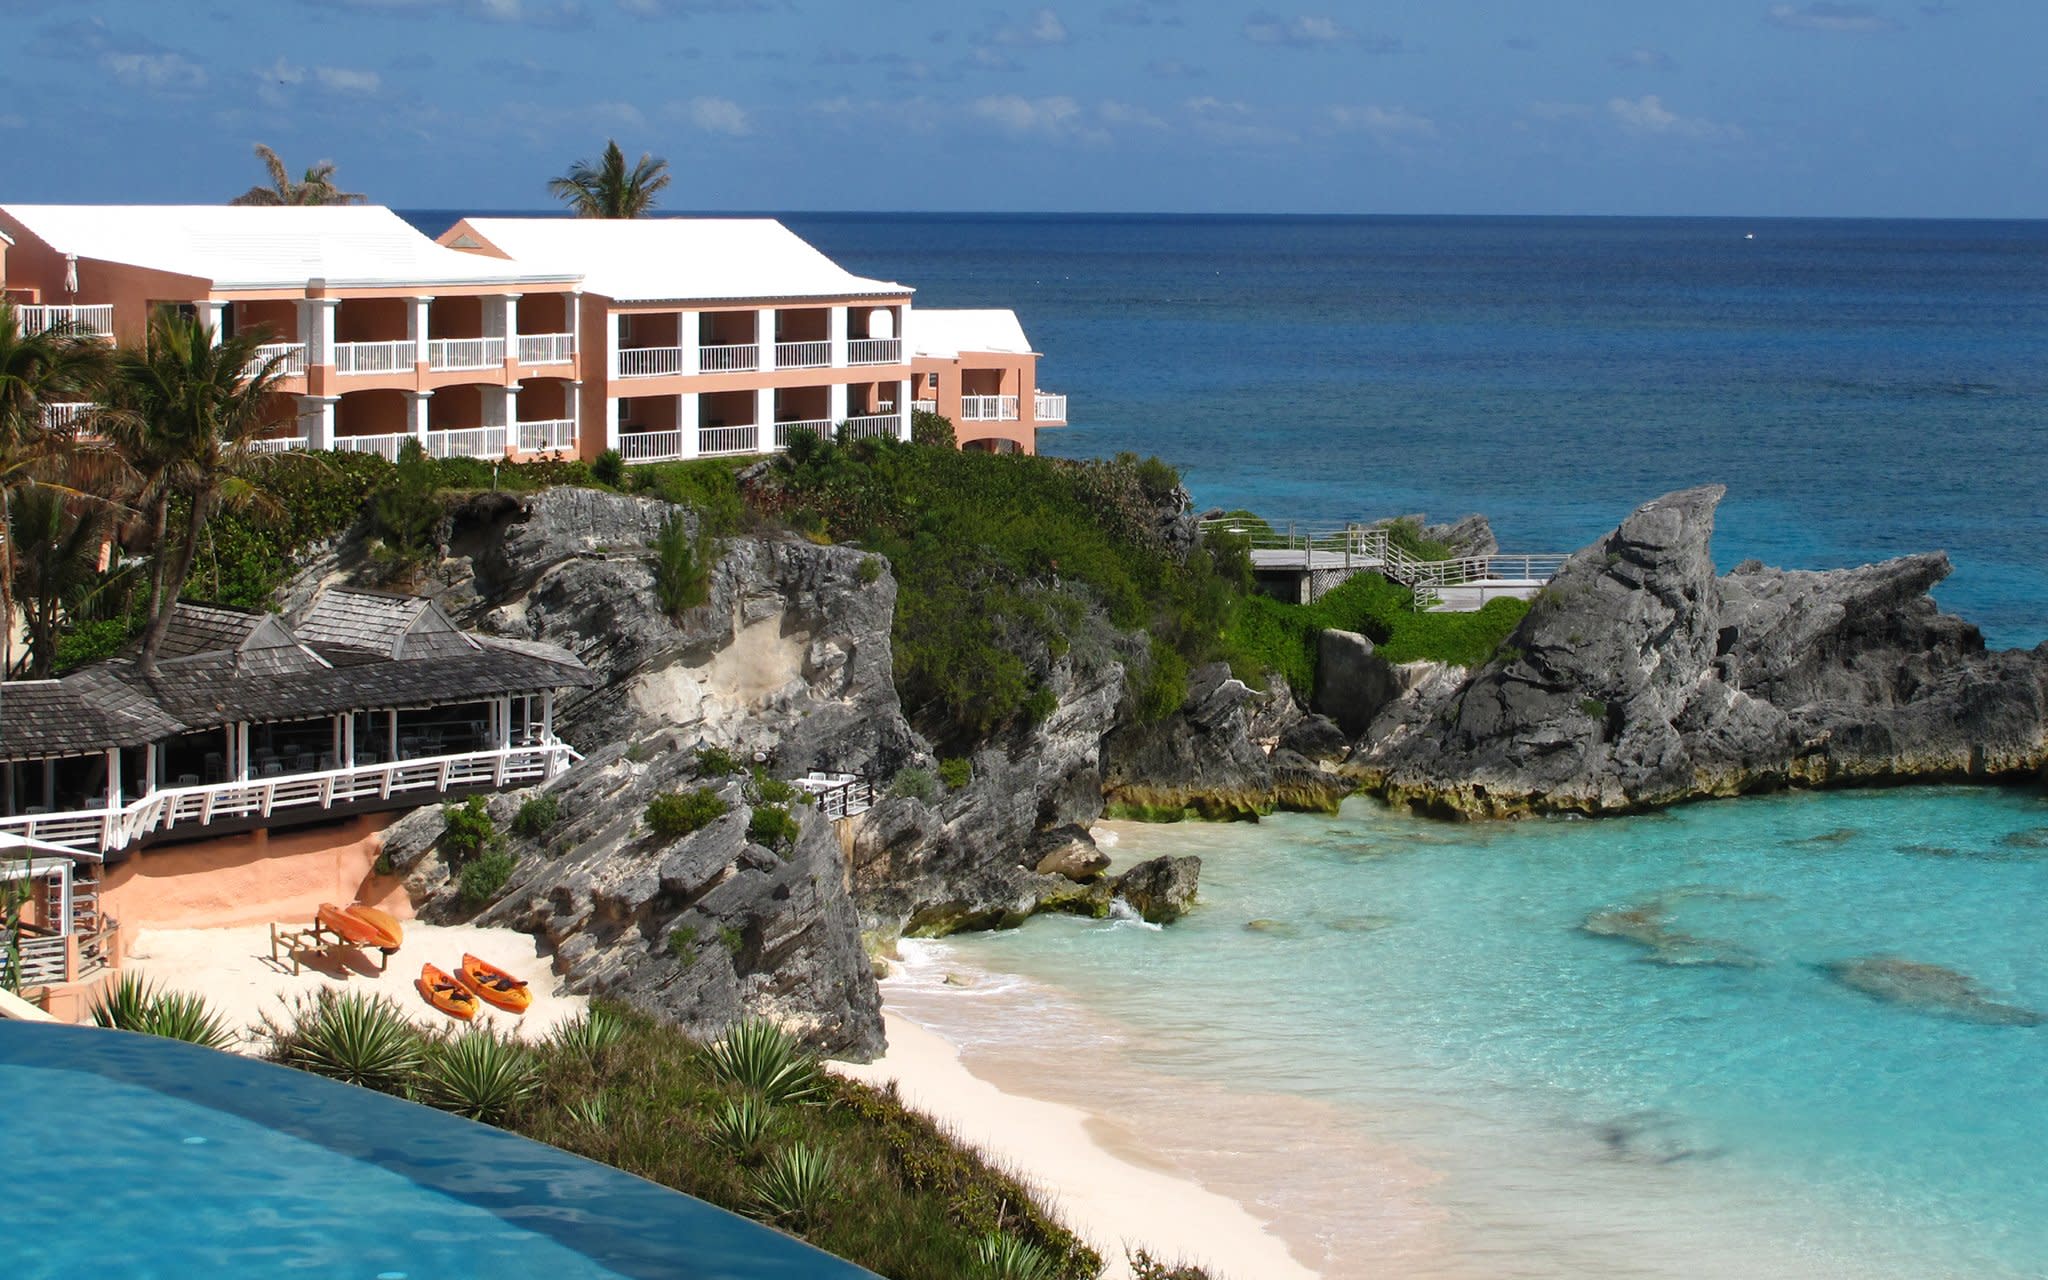 The Best Things to Do in Bermuda